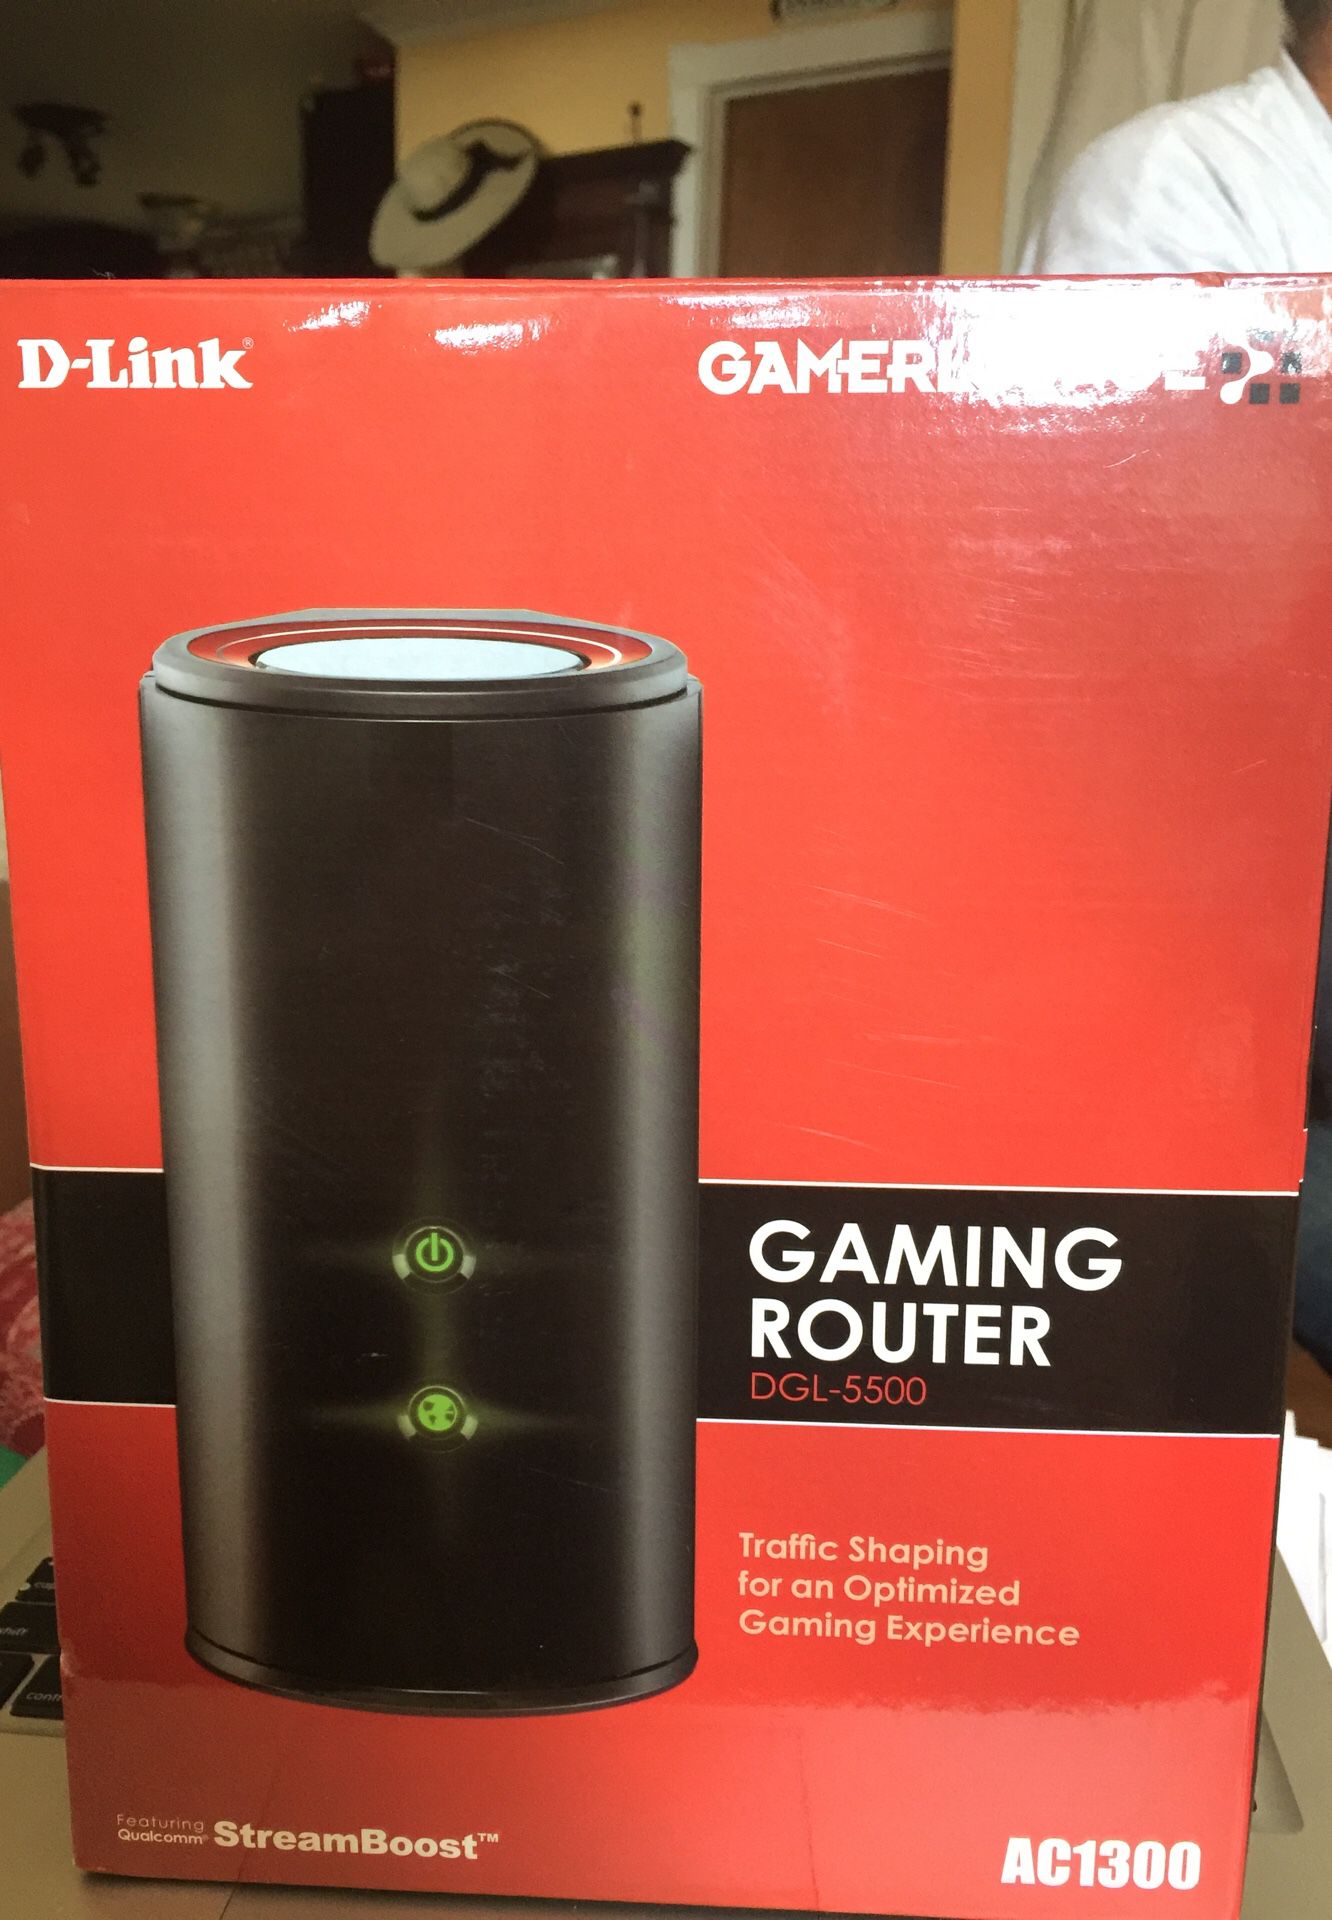 WiFi router high speed for home or gaming use